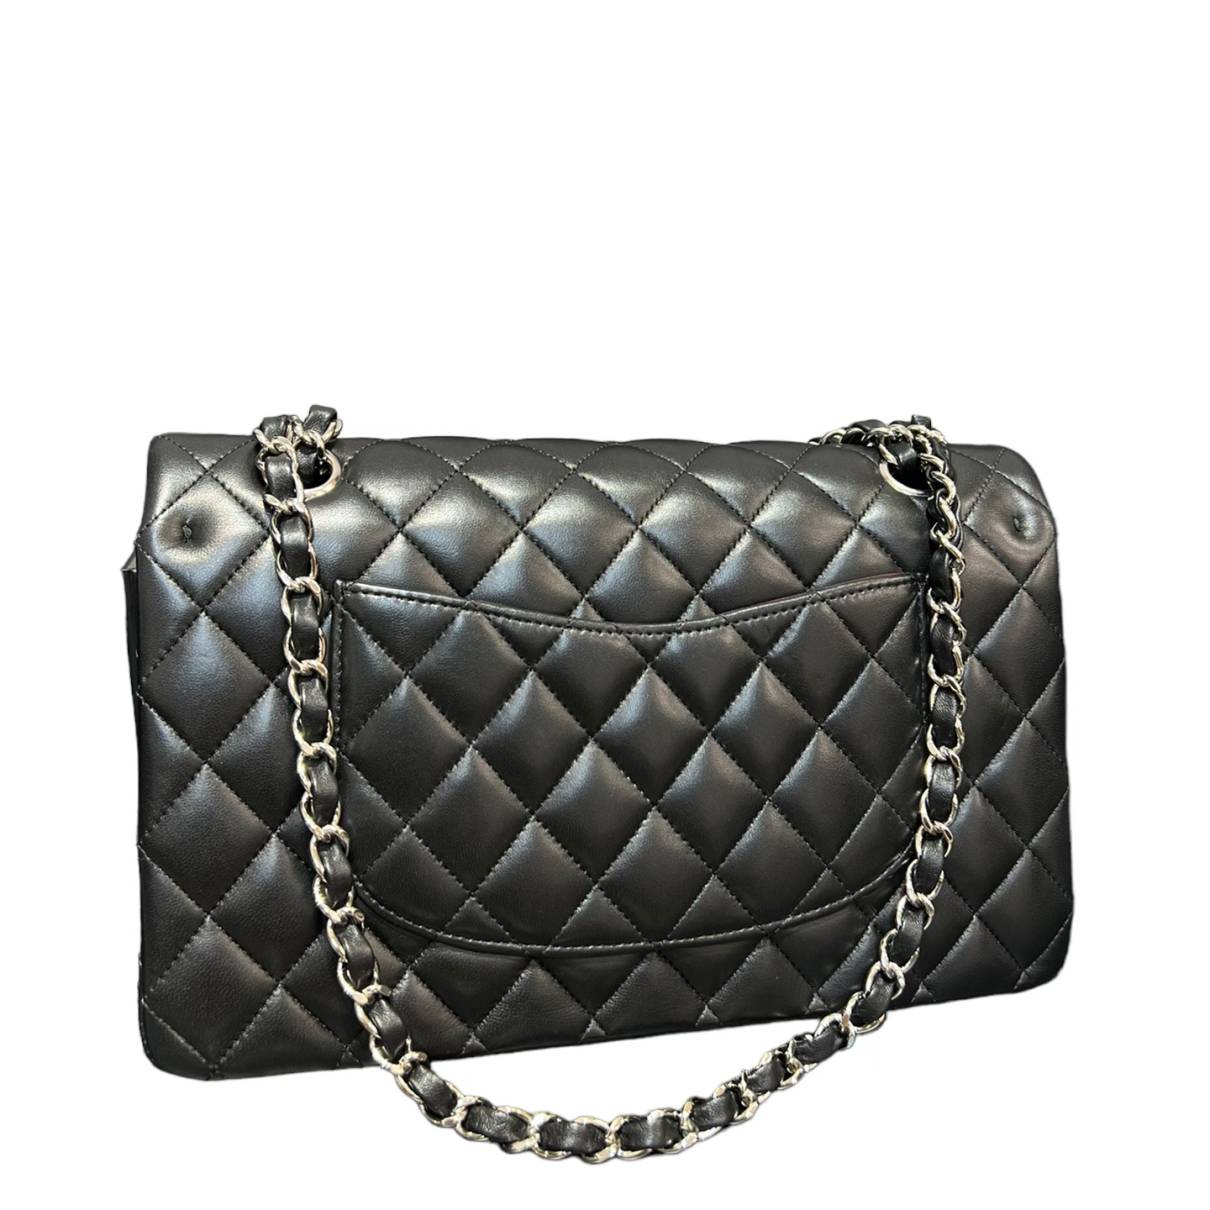 Timeless/classique leather crossbody bag Chanel Black in Leather - 35869826